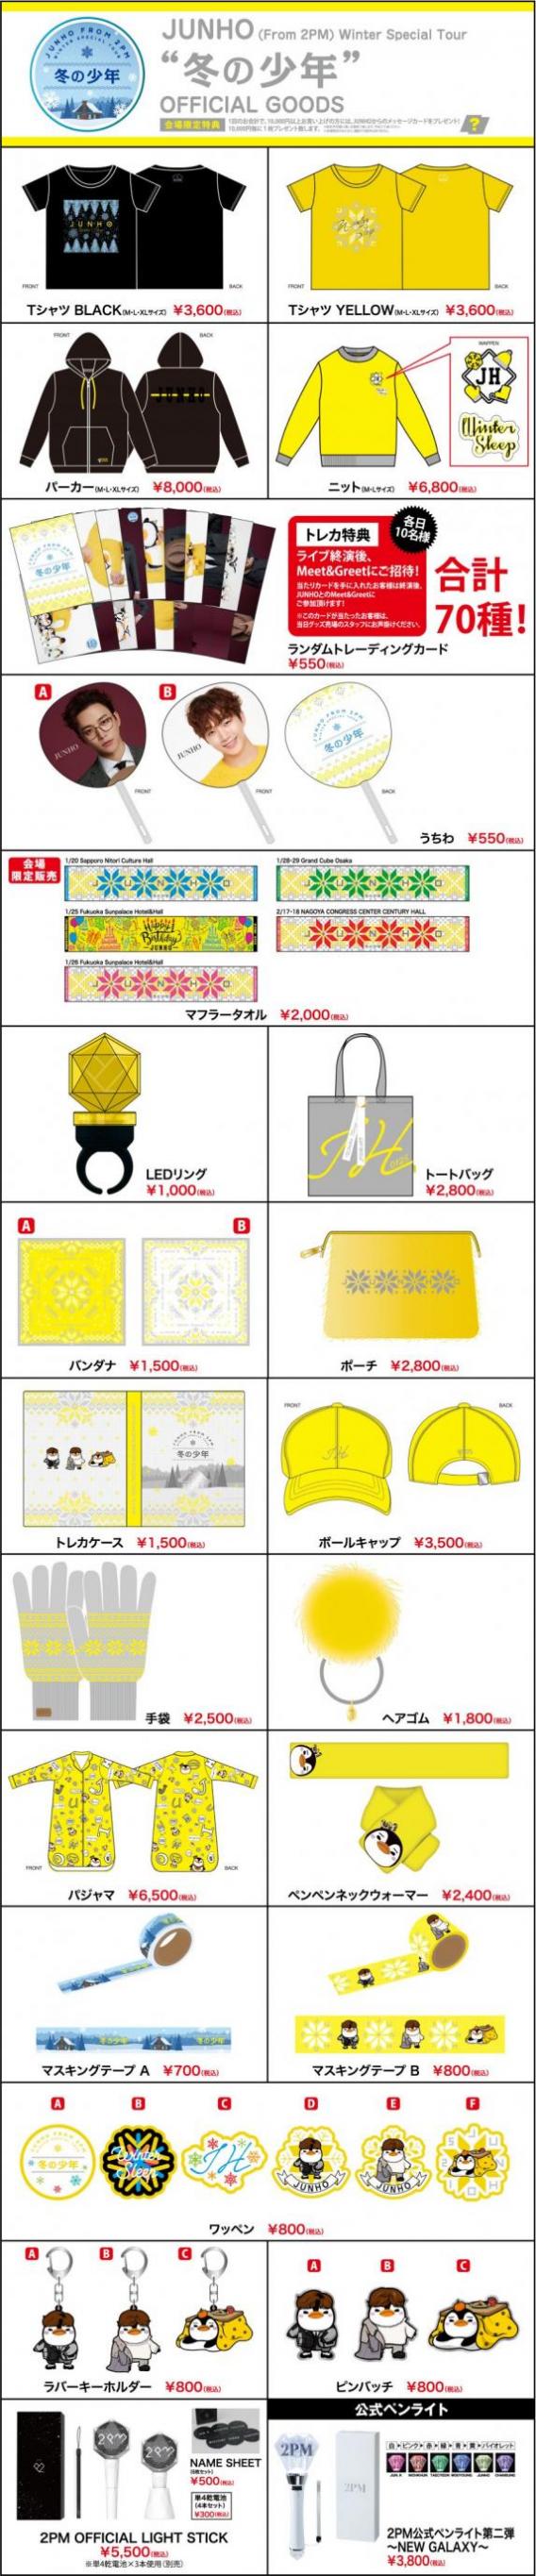 2PMジュノ グッズ - whirledpies.com